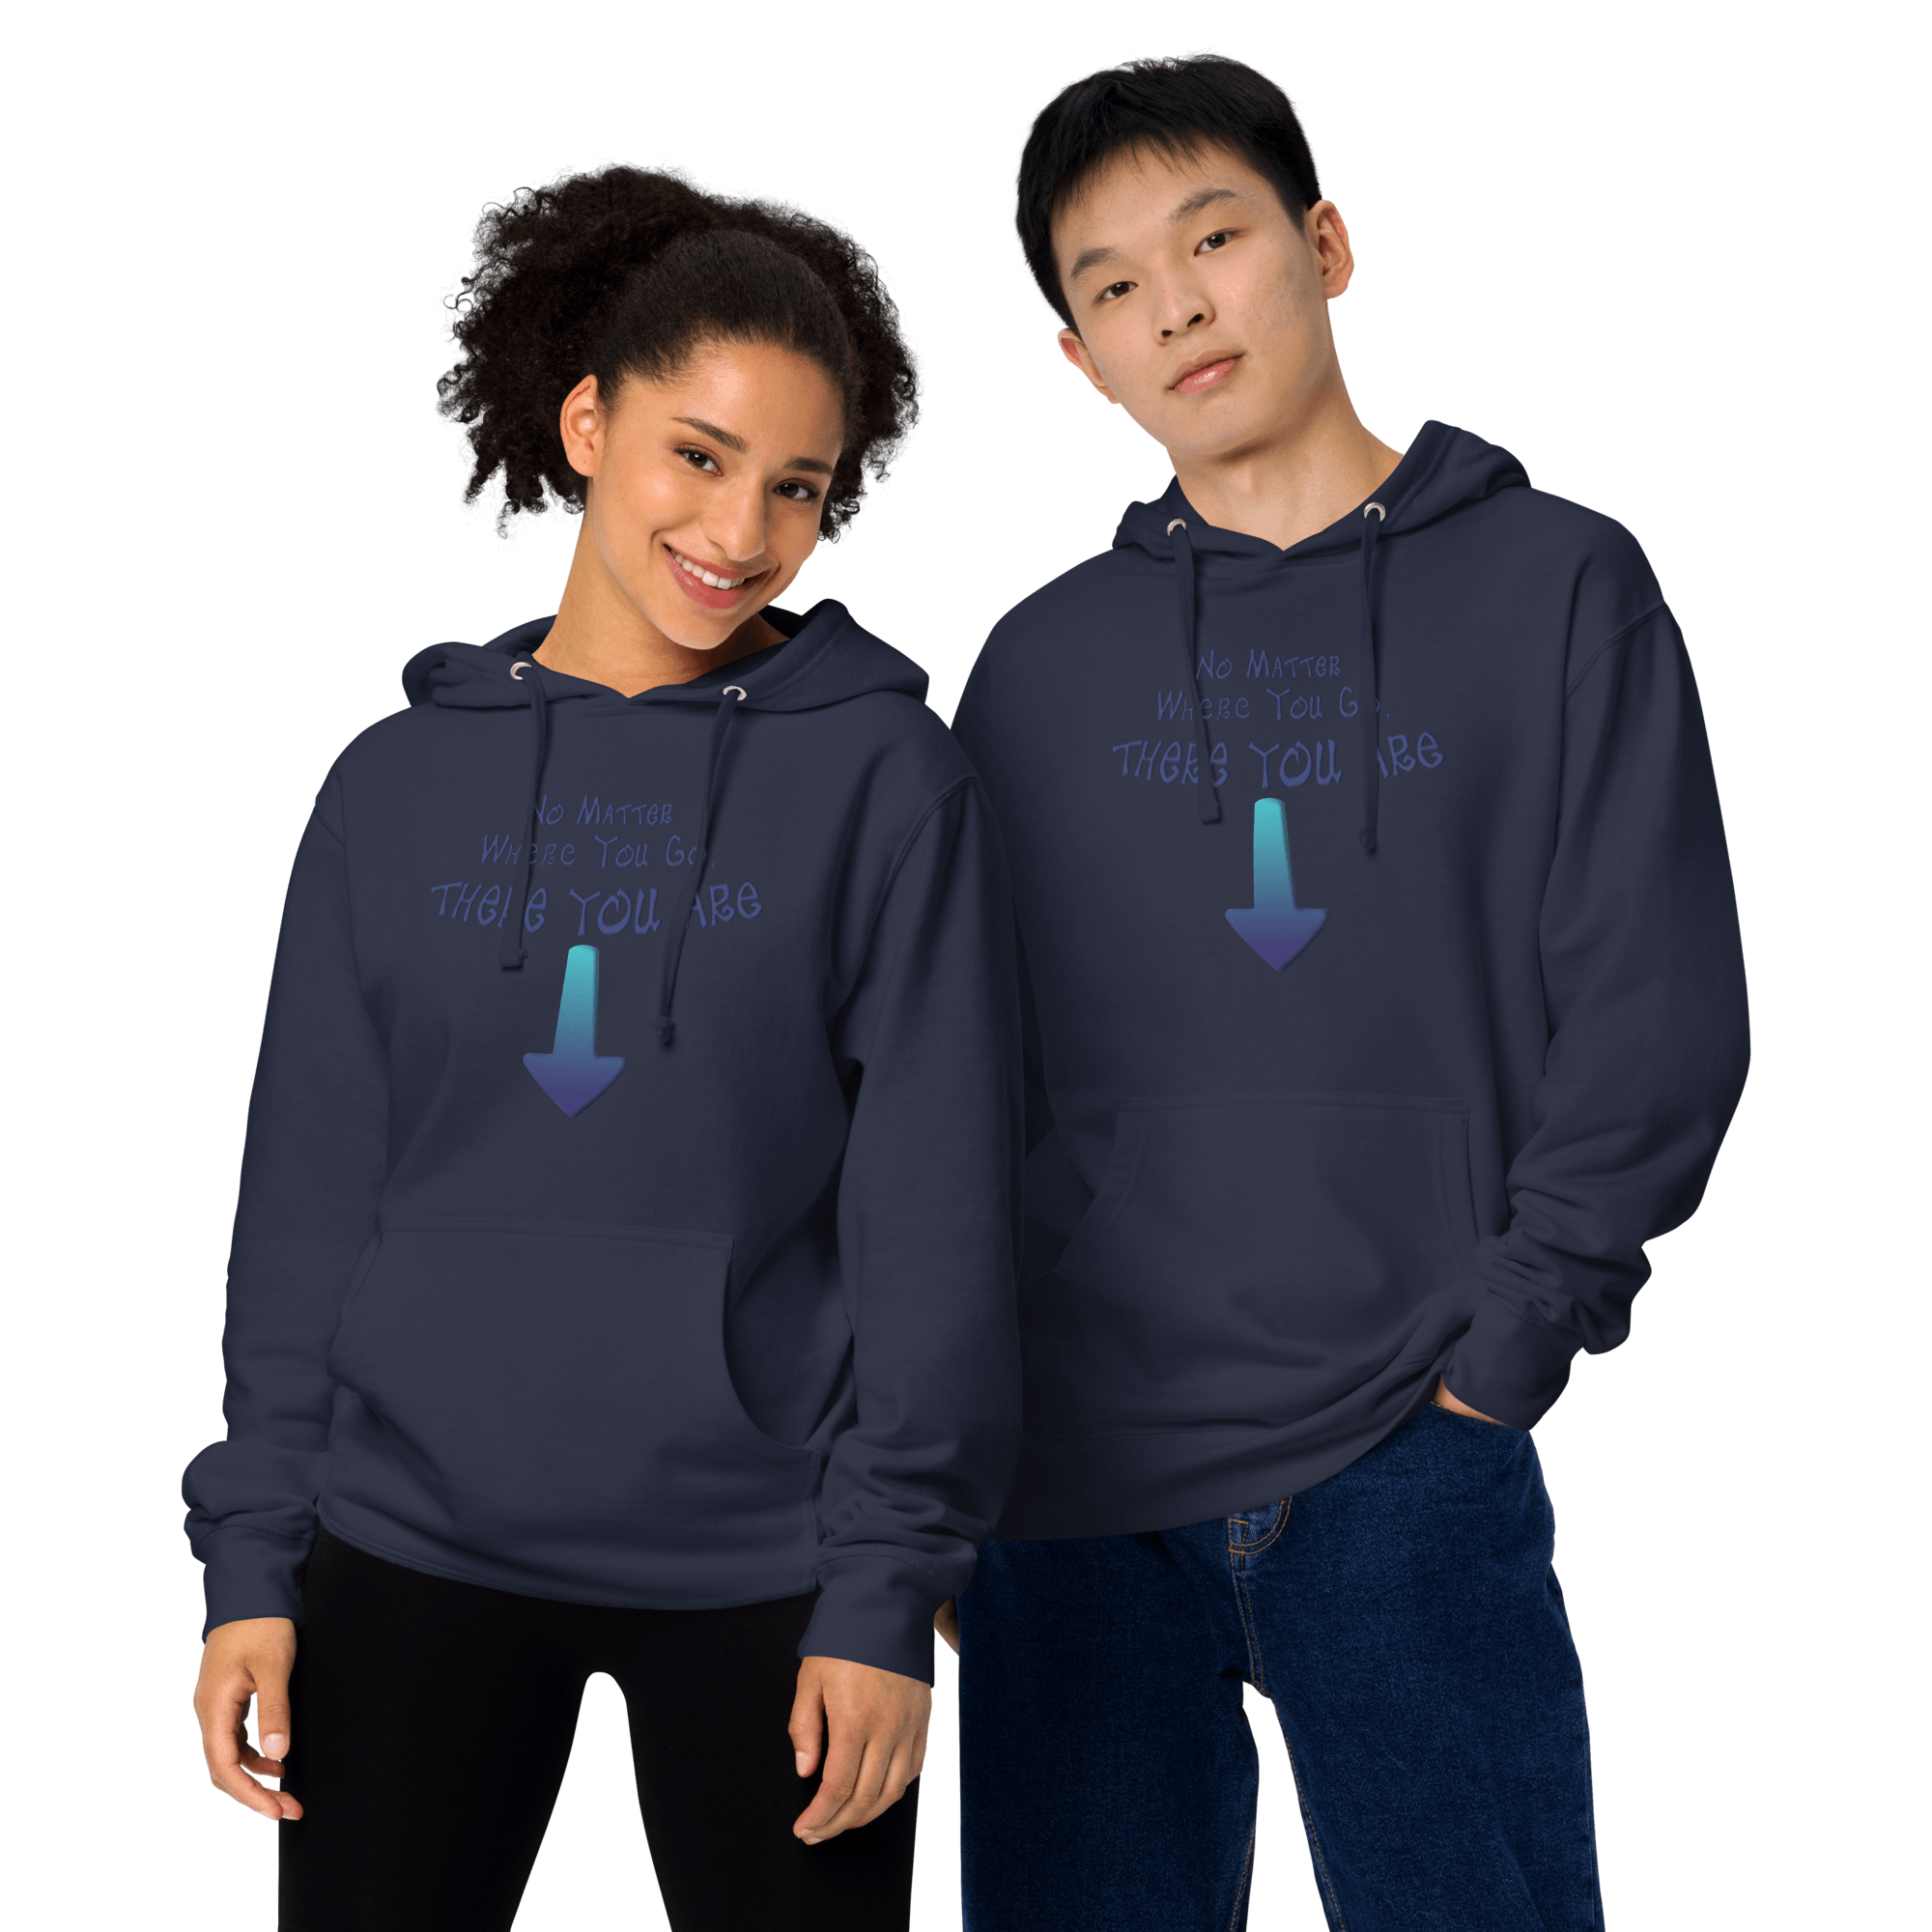 No Matter Where You Go, There You Are Unisex midweight hoodie